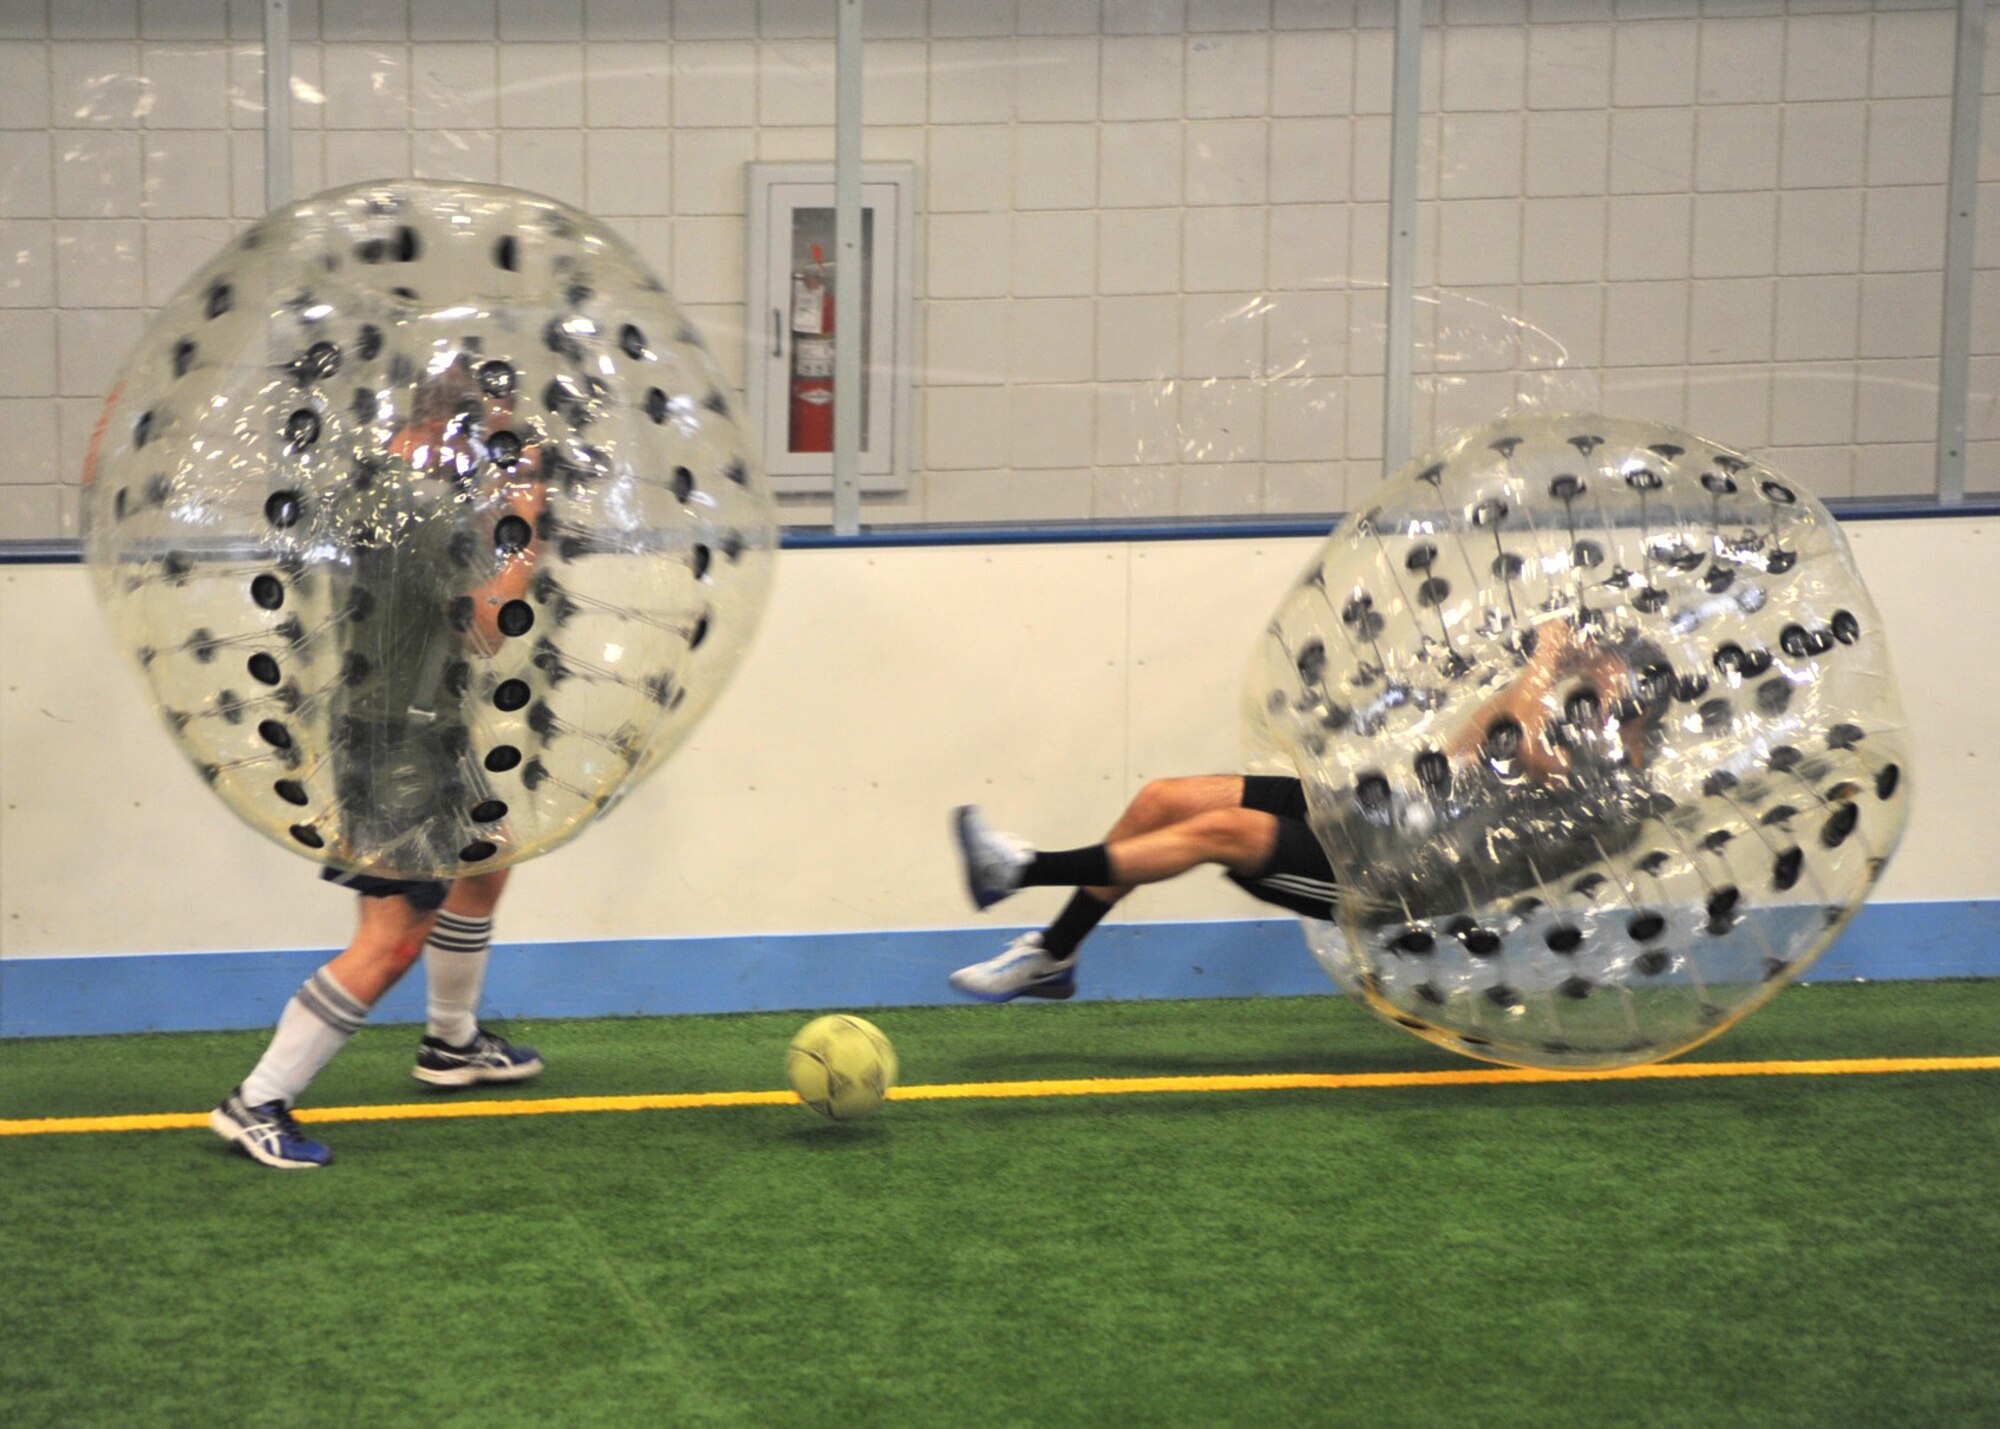 Airmen from the 319th Air Base Wing compete in a knocker ball tournament March 18, 2016, on Grand Forks Air Force Base, N.D. Airmen wore a plastic bubble and played soccer, but were able to knock each other off their feet. (U.S. Air Force photo by Airman 1st Class Patrick Wyatt/Released)